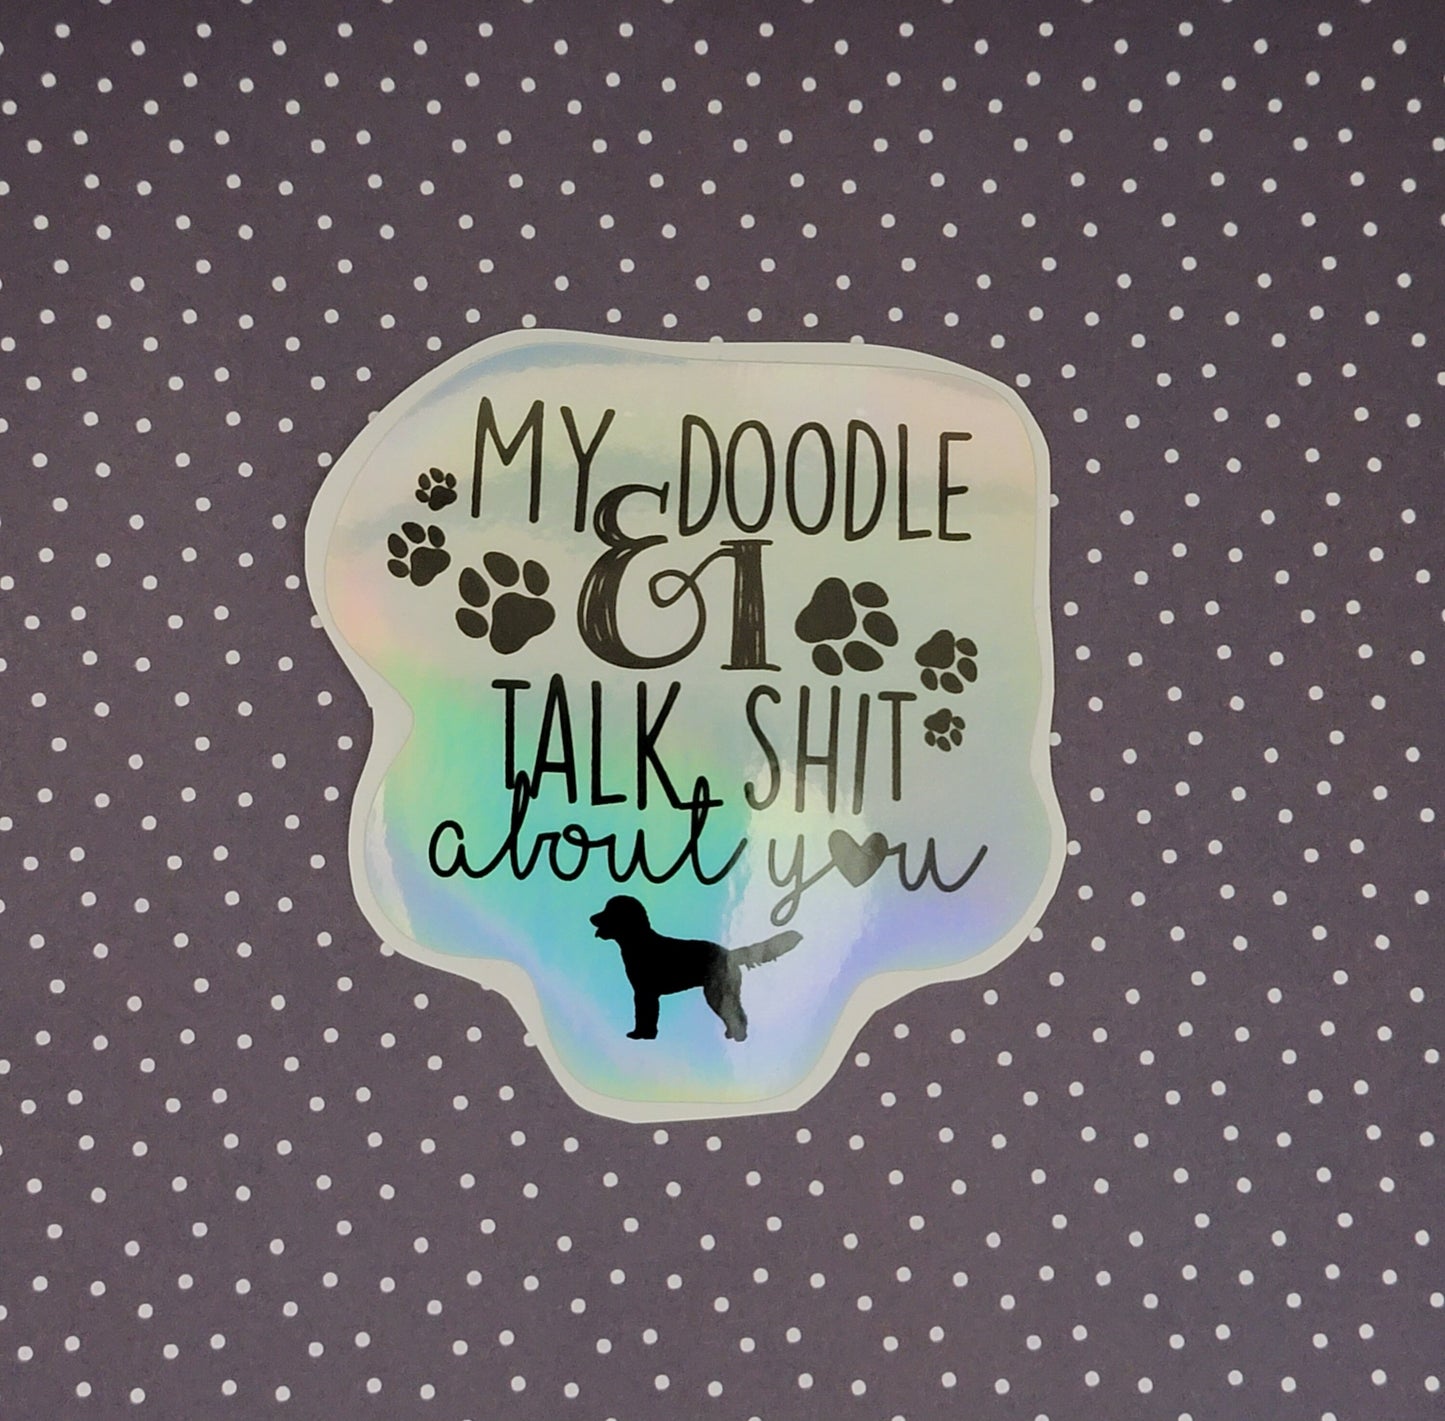 My doodle and I talk shit about you